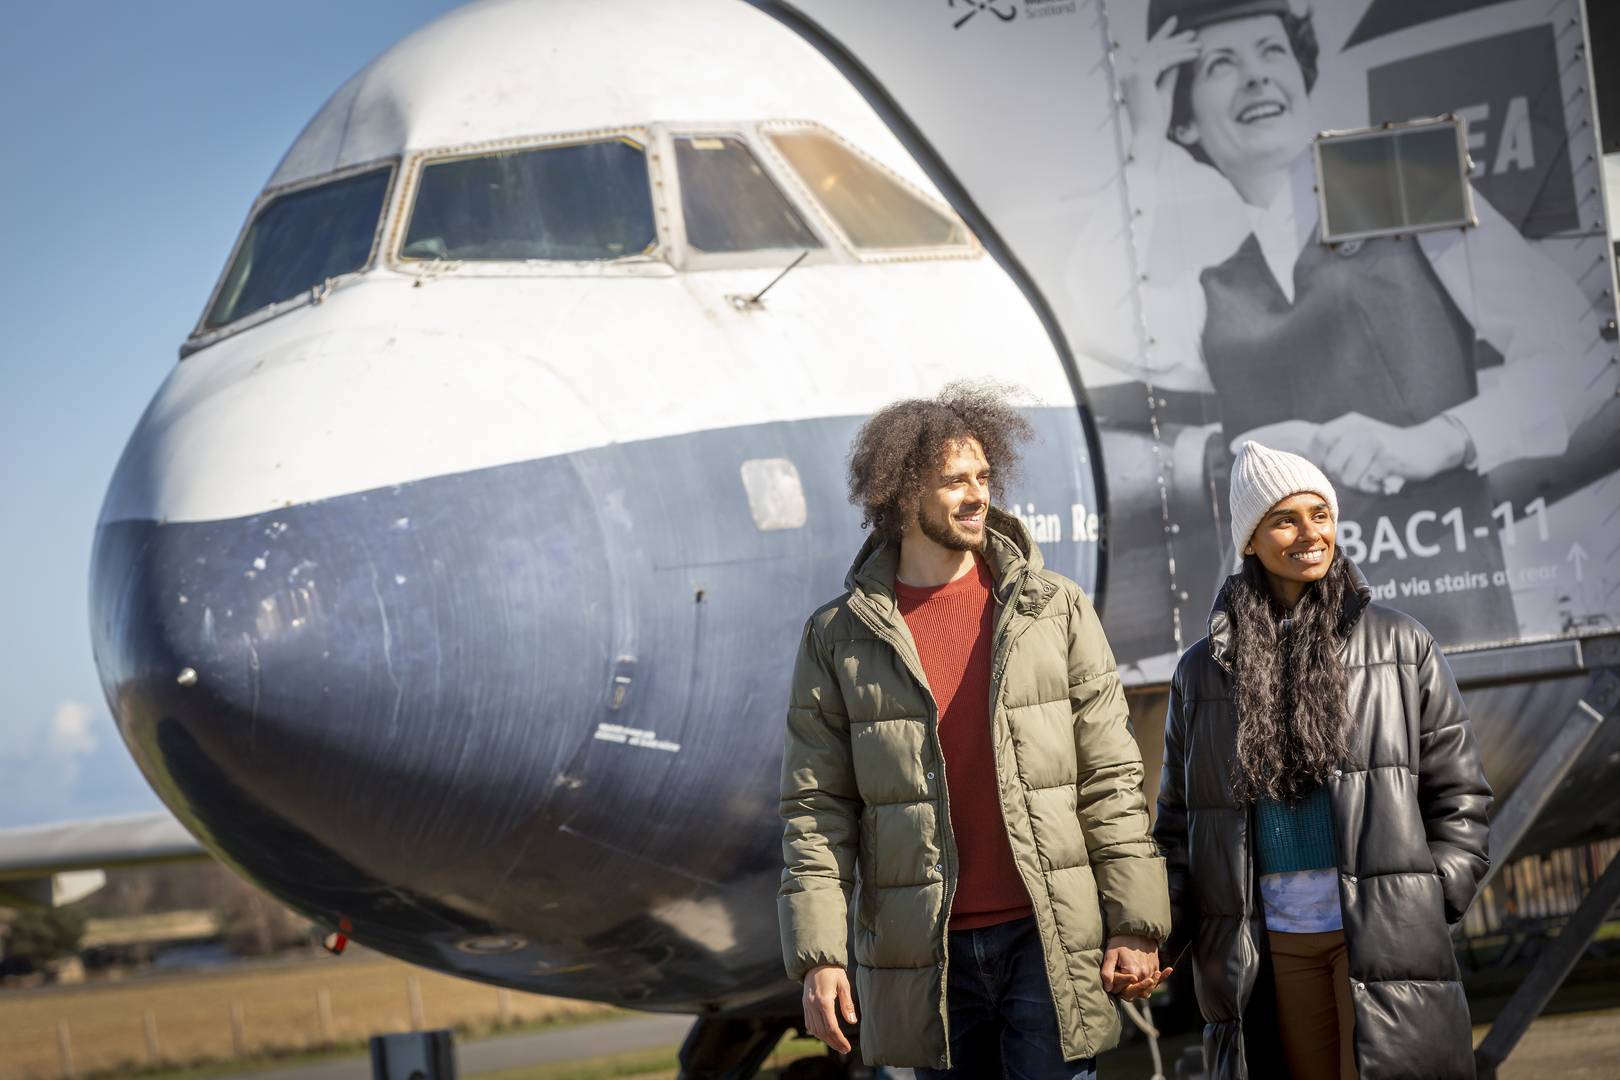 Two visitors in front of the BAC 1-11 aircraft outside at the National Museum of Flight , Image © Ruth Armstrong Photography